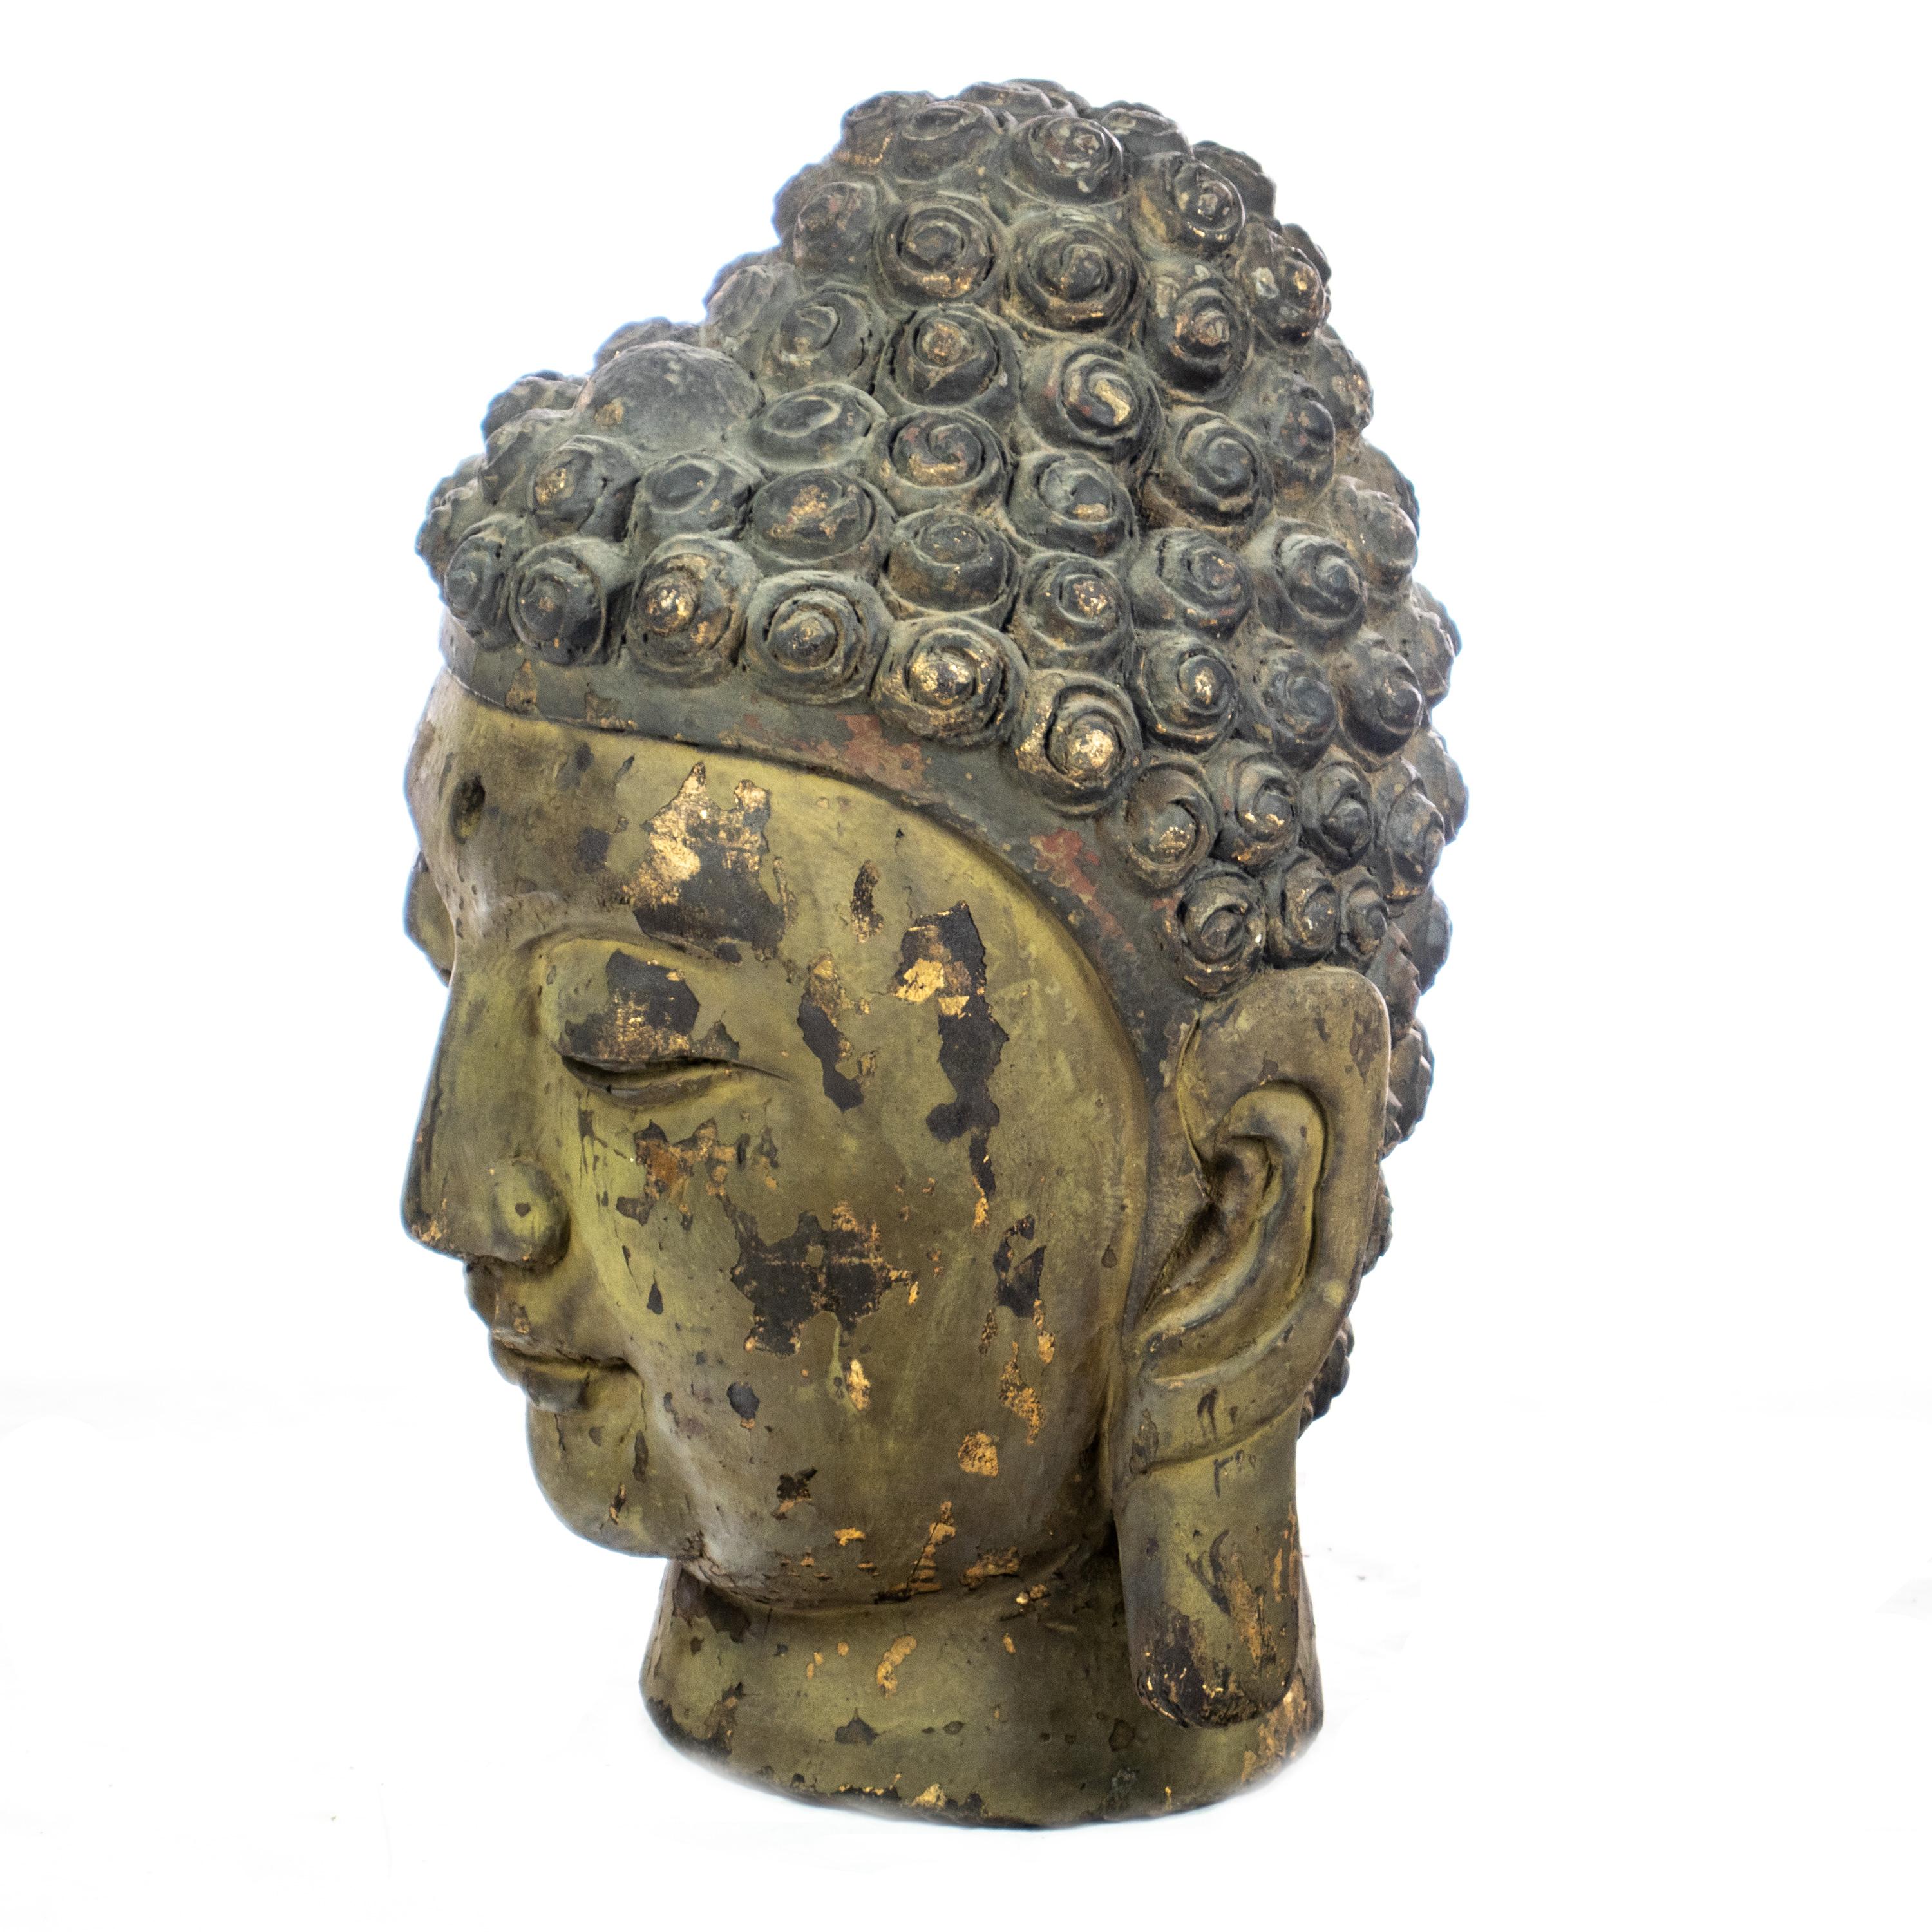 Carved wood Buddha handmade head. Antique Asian sculpture full of tradition and mysticism created with extreme detail evoking ancient times. Made by fantastic local artists which transform natural materials into unique art works. This sculpture is